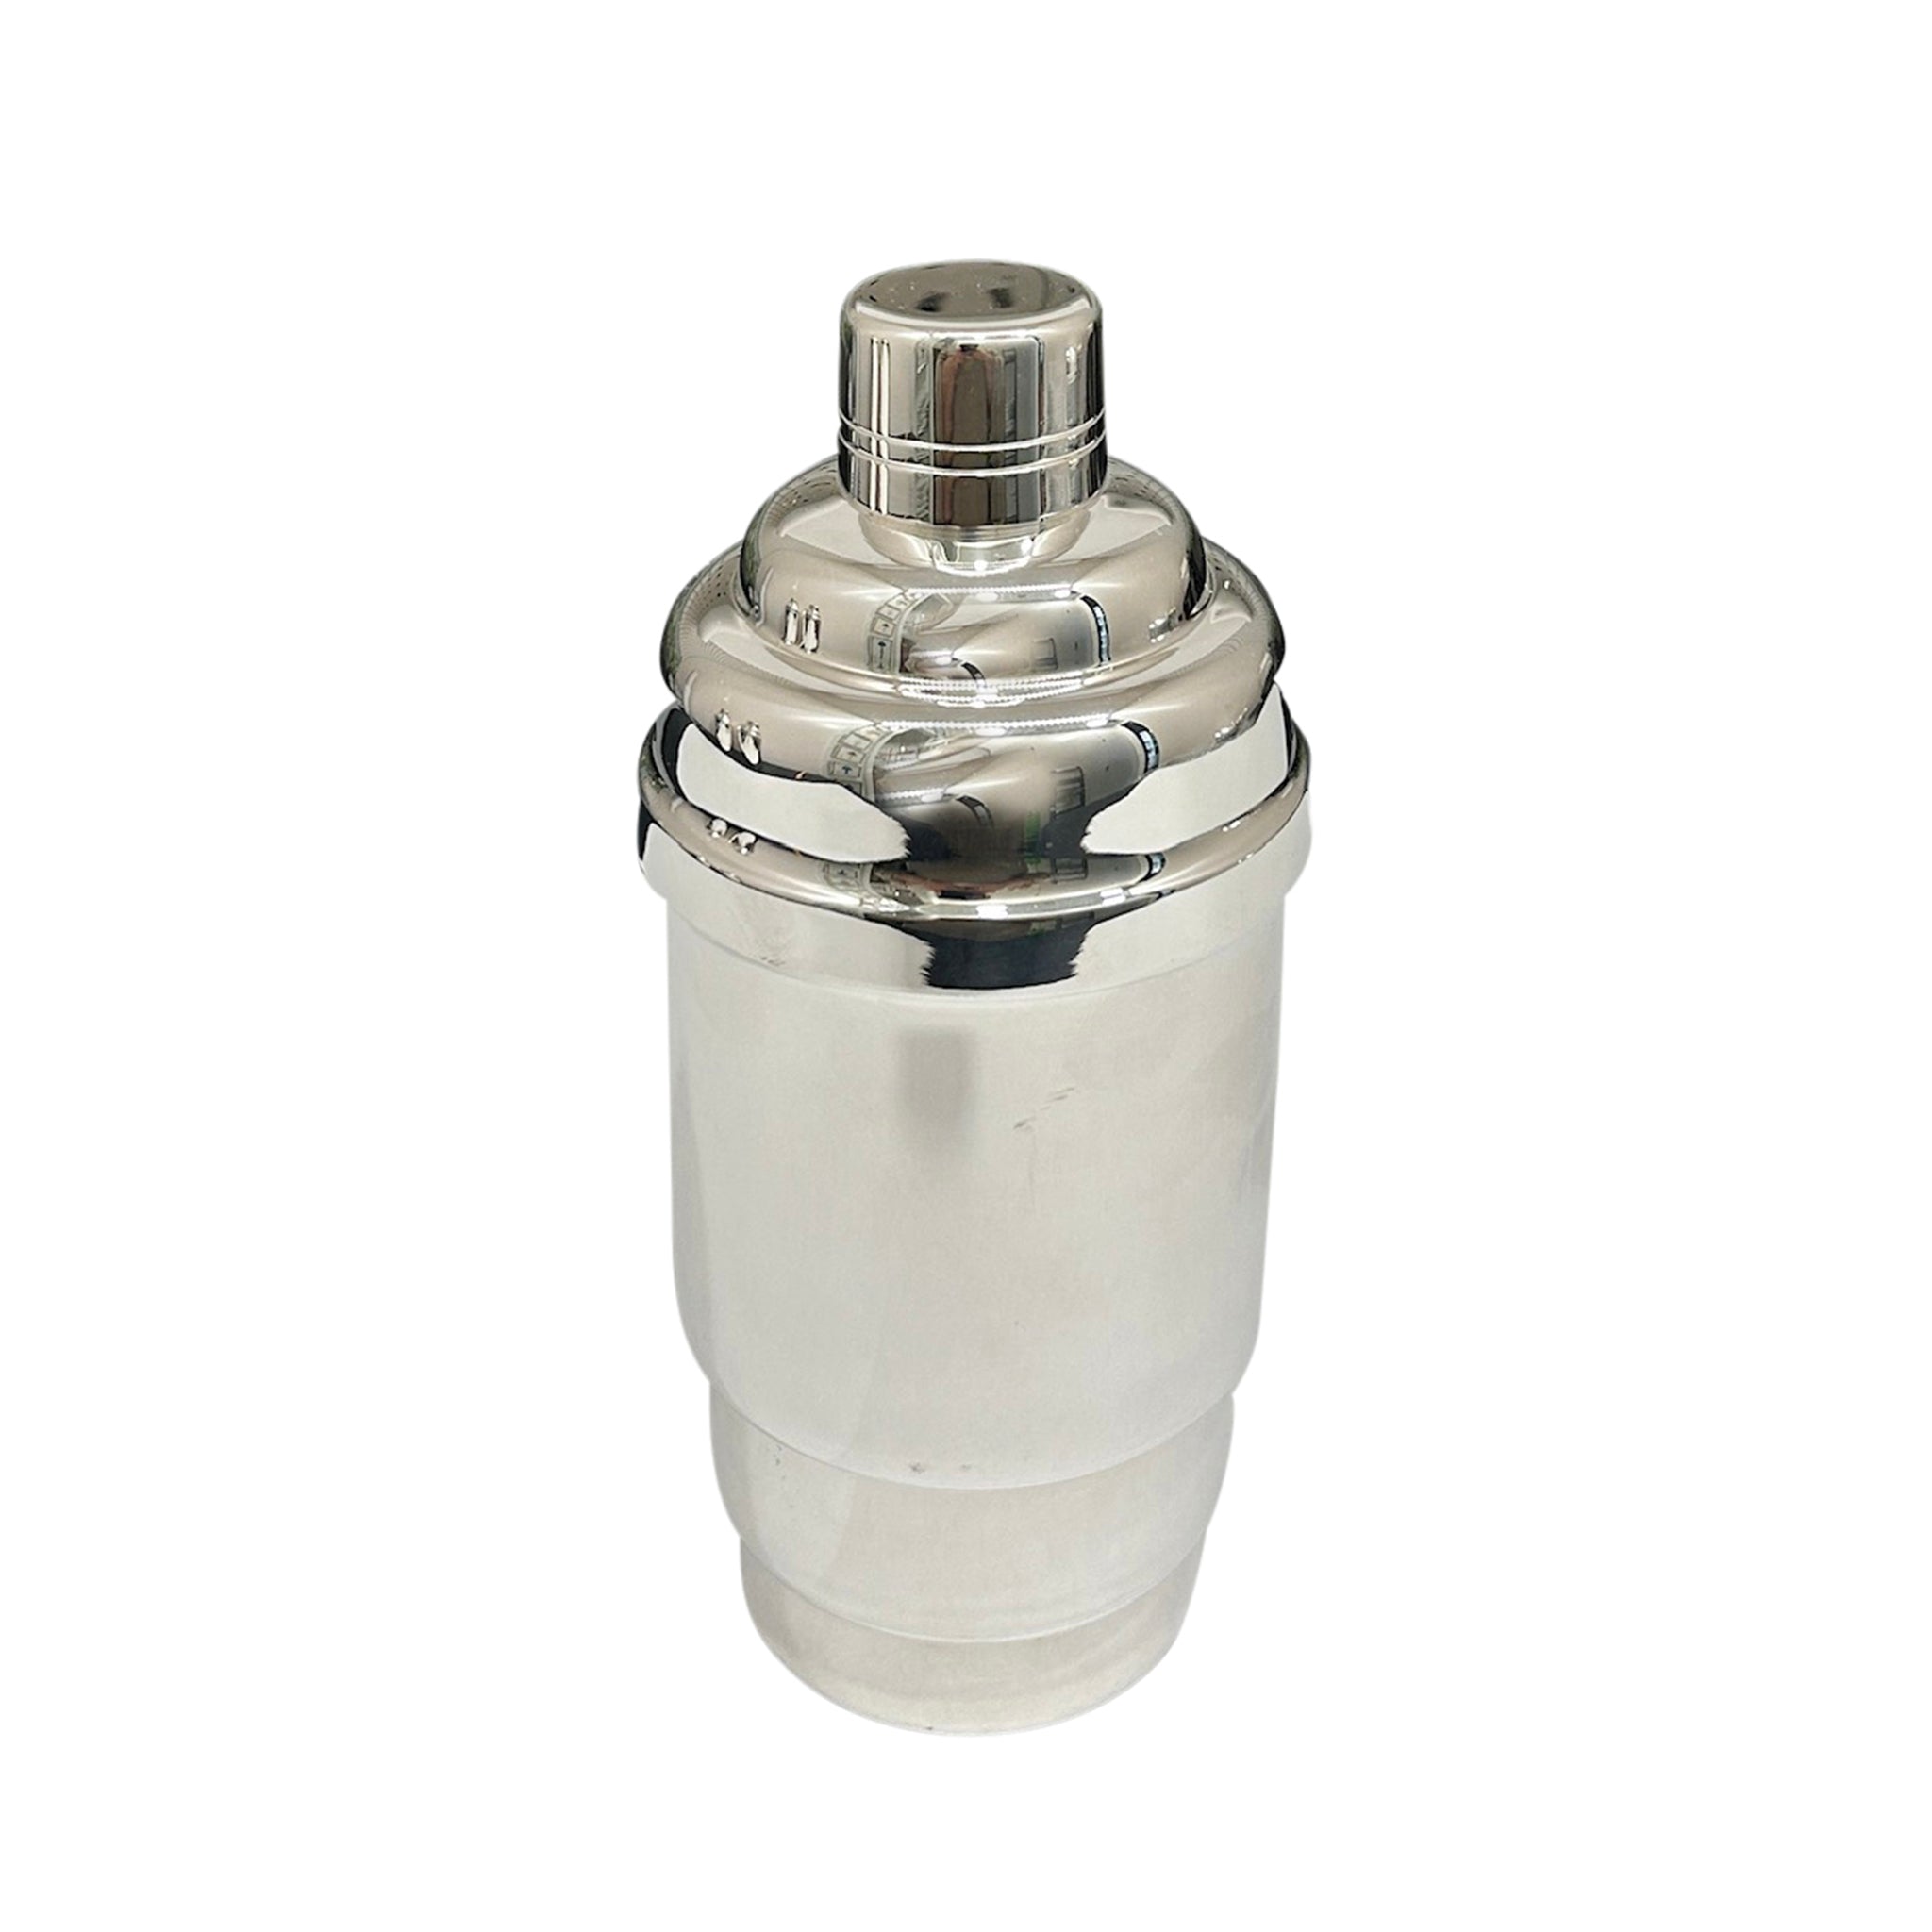 Vintage French Cocktail Shaker with Stepped Design – KRB